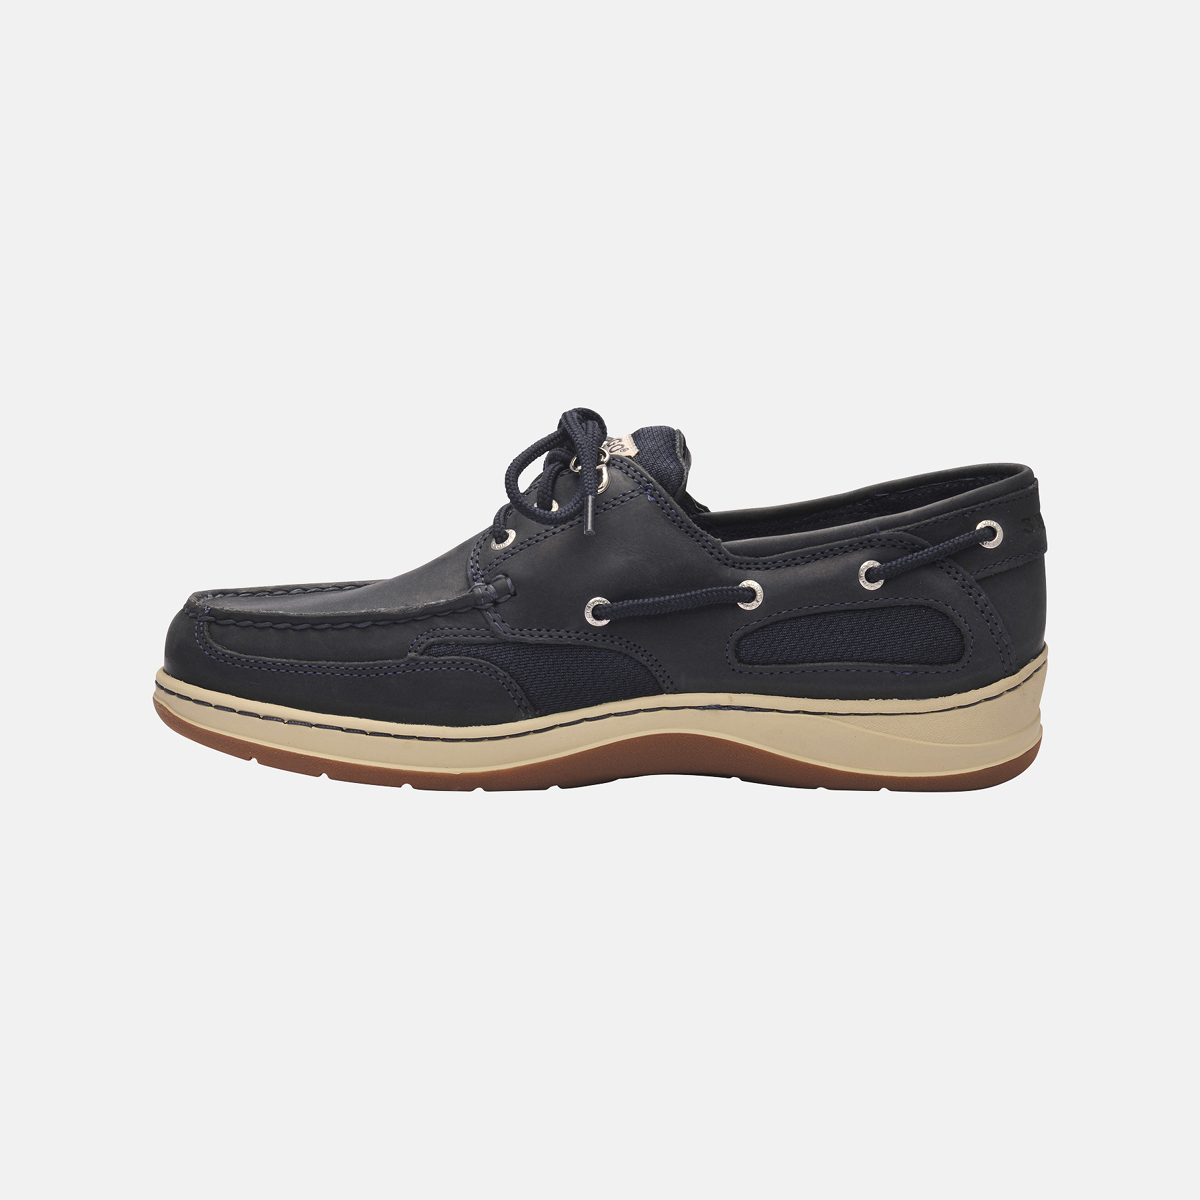 Sebago Clovehitch II chaussures bateau homme blue navy leather, taille 43 (US 9)